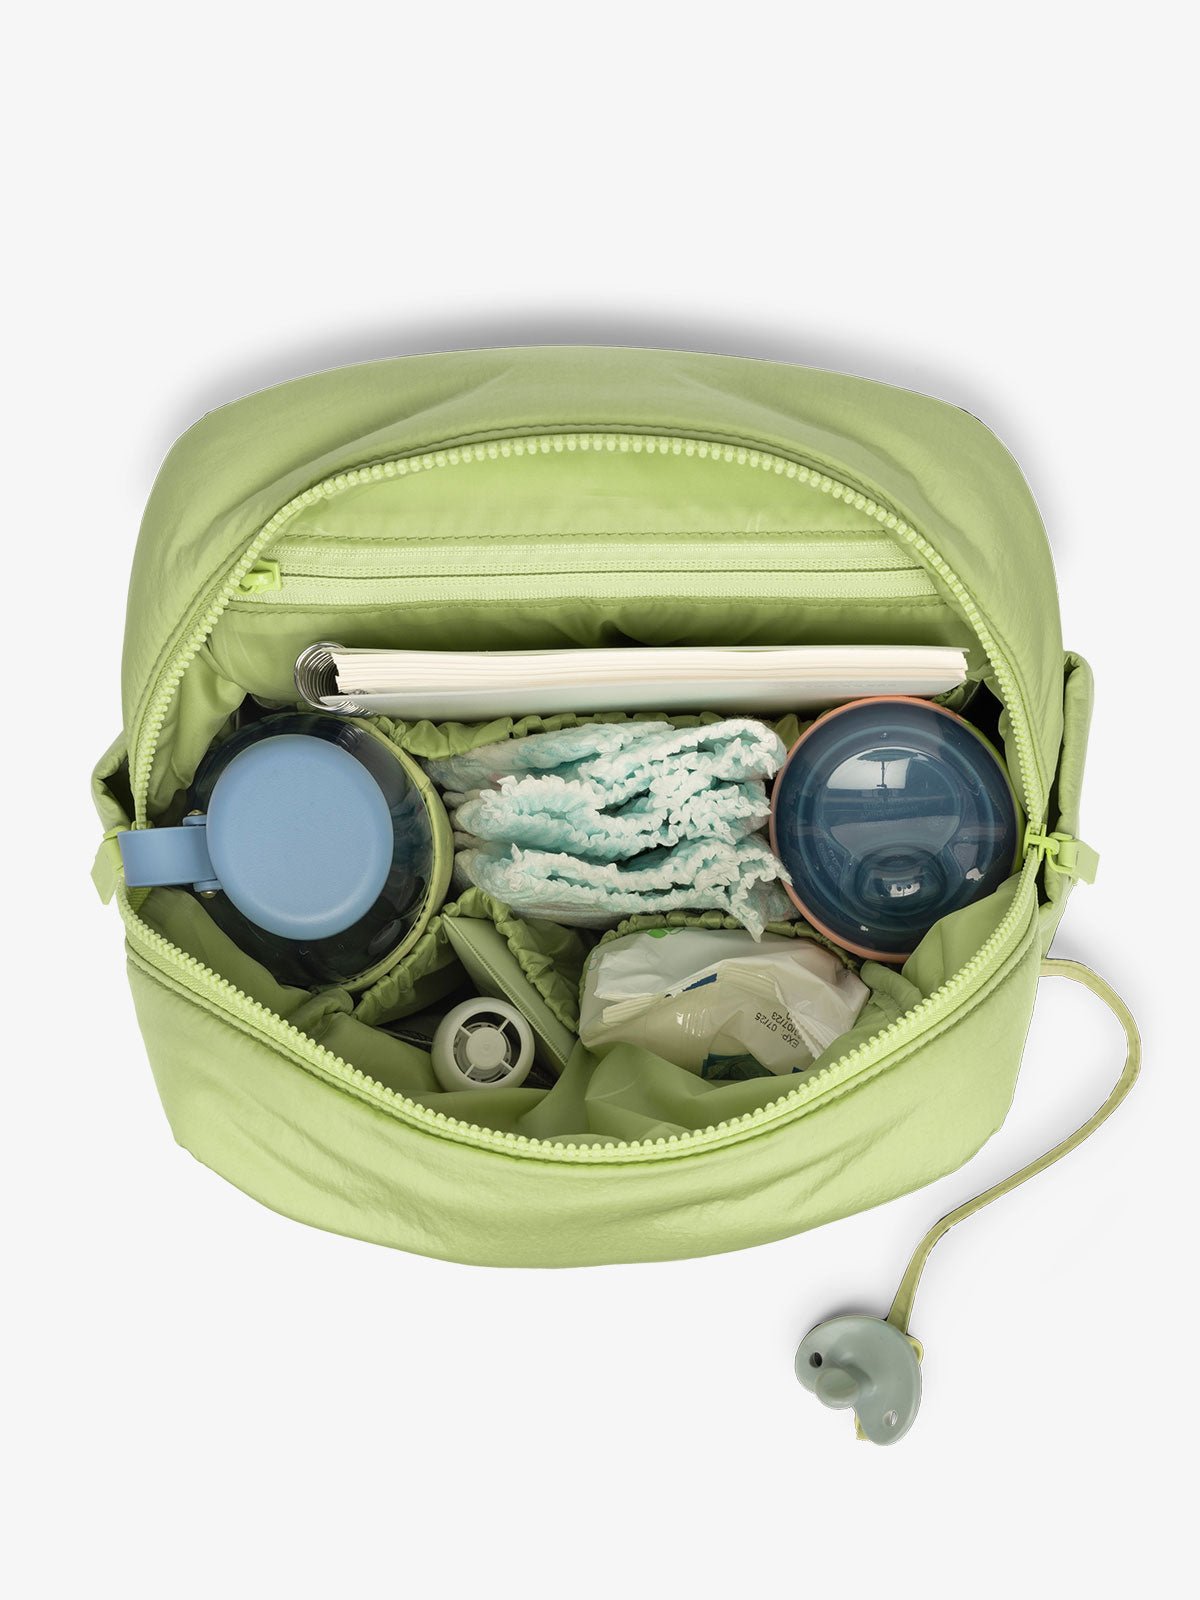 CALPAK mini diaper backpack with multiple interior pockets, bottle pockets, and 11 inch tablet sleeve in lime green